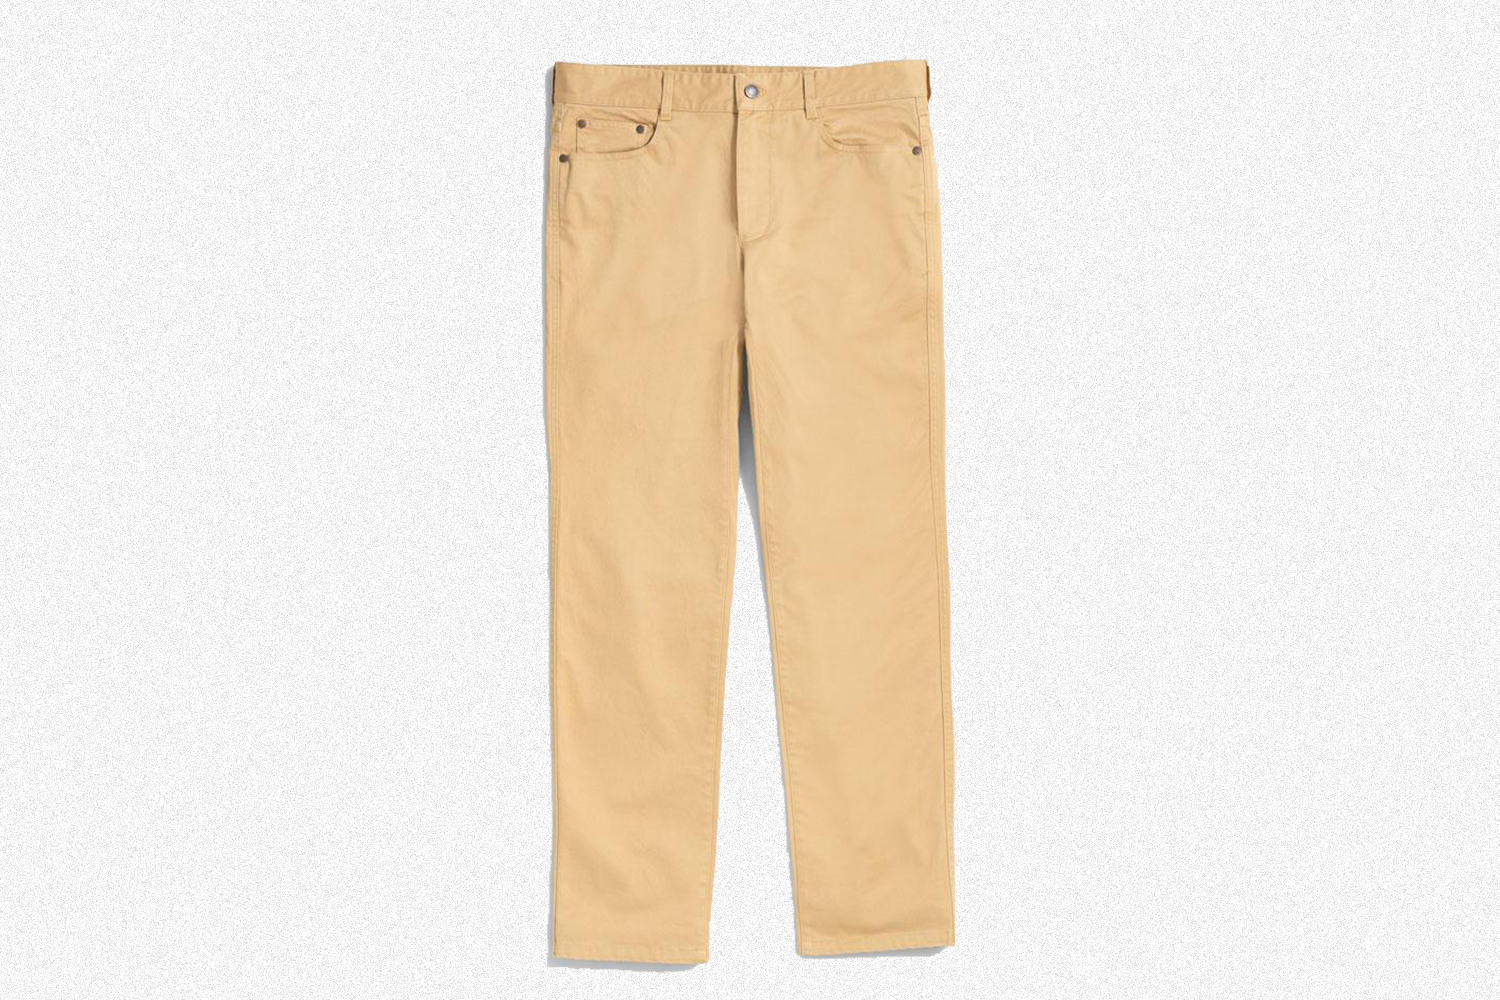 Organic Twill 5-Pocket Pant in flax from United by Blue